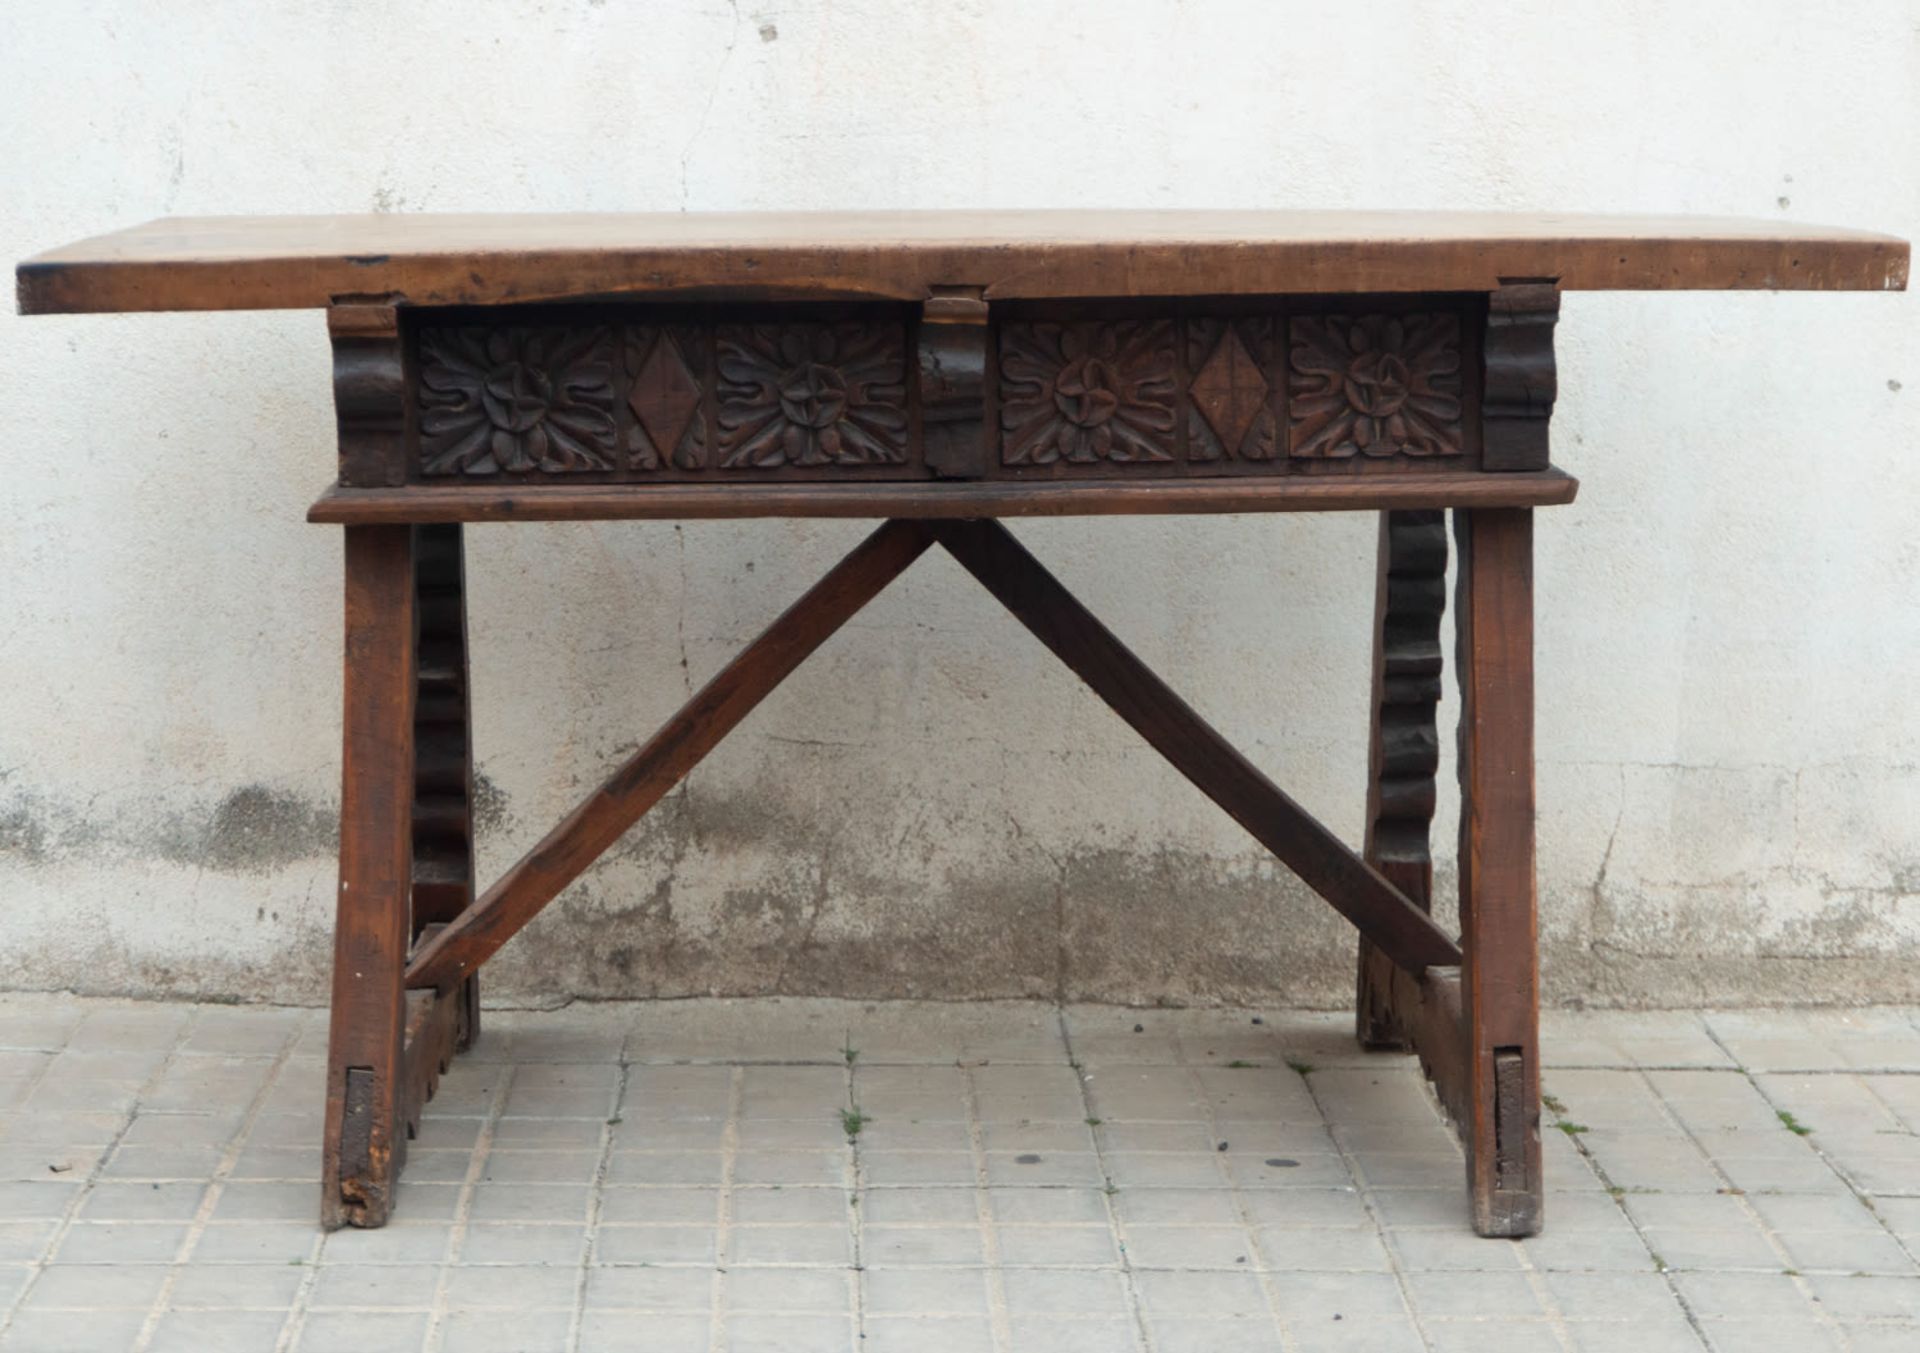 Tyrolean or German kitchen table from Bavaria in oak wood from the 16th century, Swiss or German Ren - Bild 4 aus 4